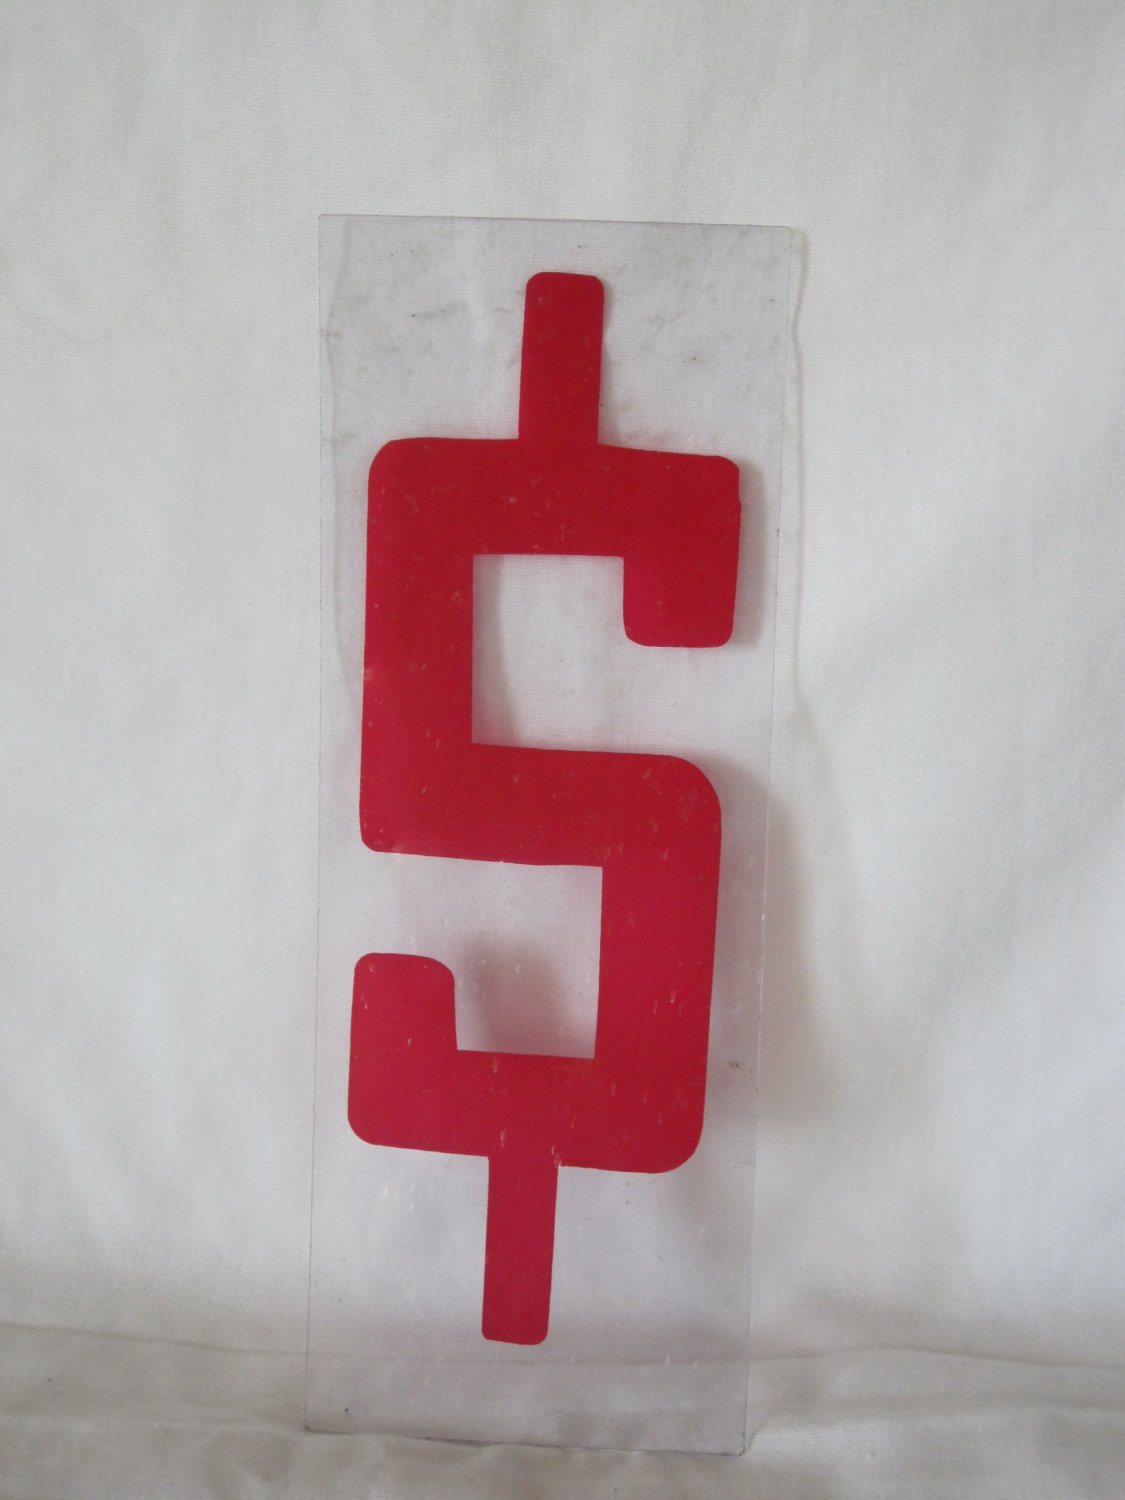 3" x 8.5" Clear w/ Red $ Dollar Sign advertsiing sign letter